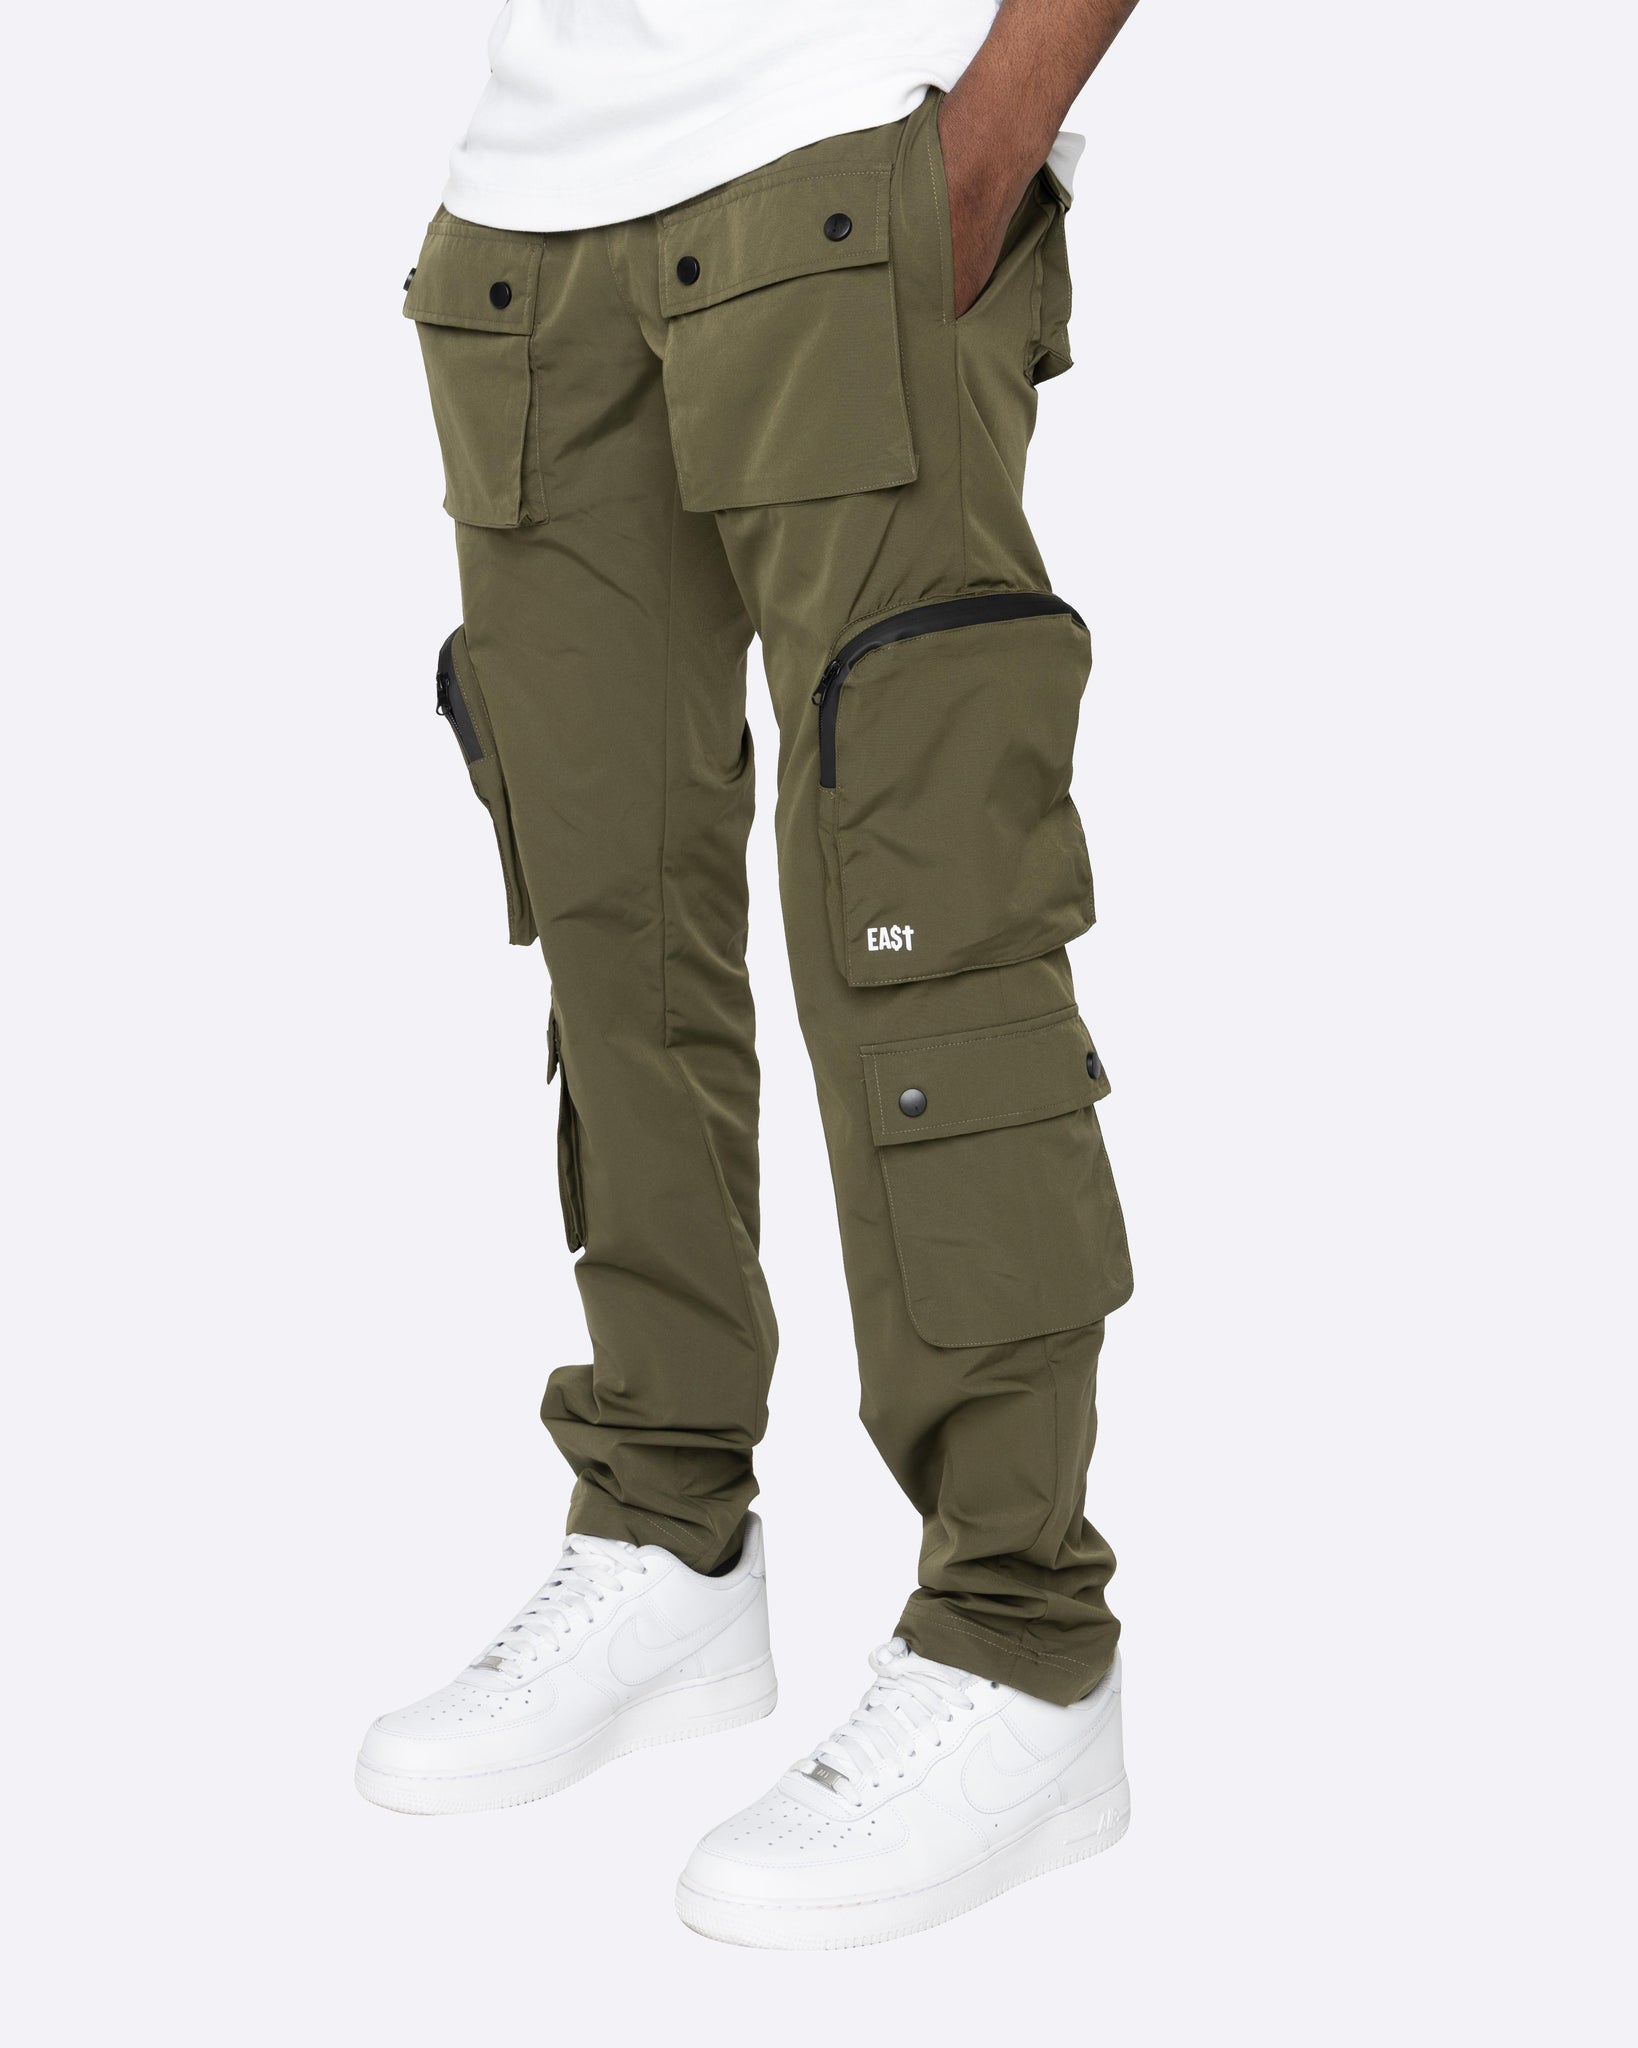 DAVE EAST "DOPE BOY" CARGOS-OLIVE